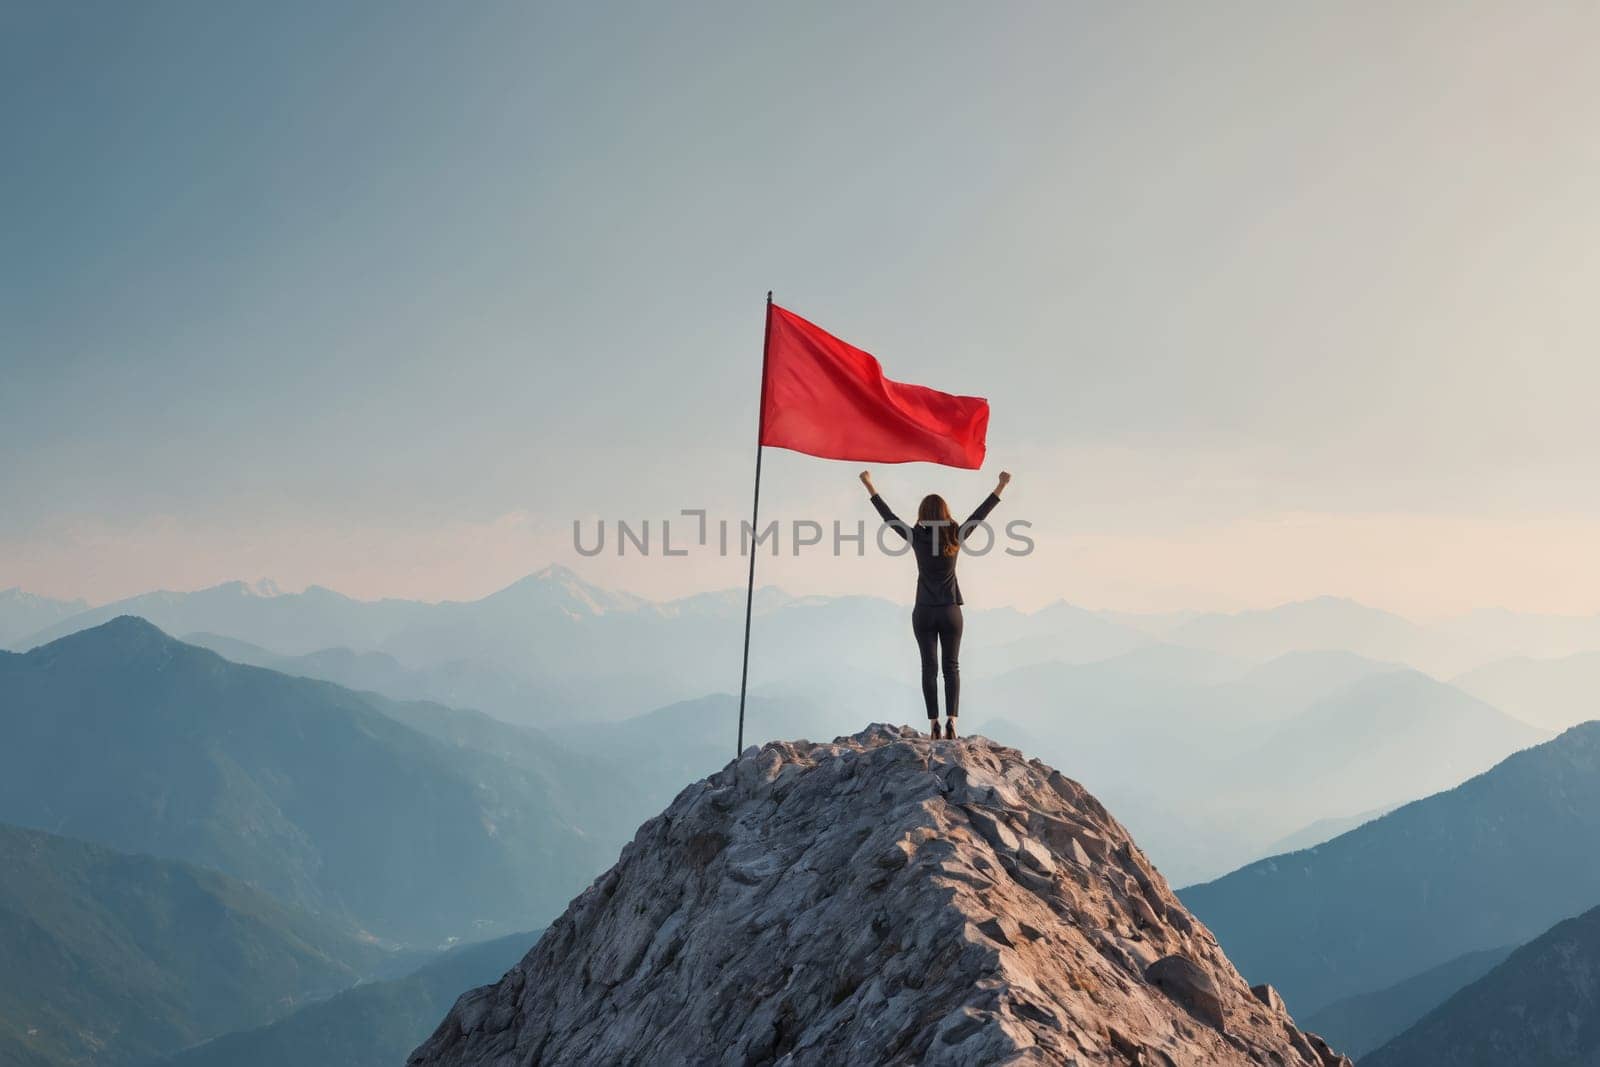 A triumphant individual standing atop a mountain holding a red flag demonstrates victory. Perfect for motivational, success or extreme sport themes.